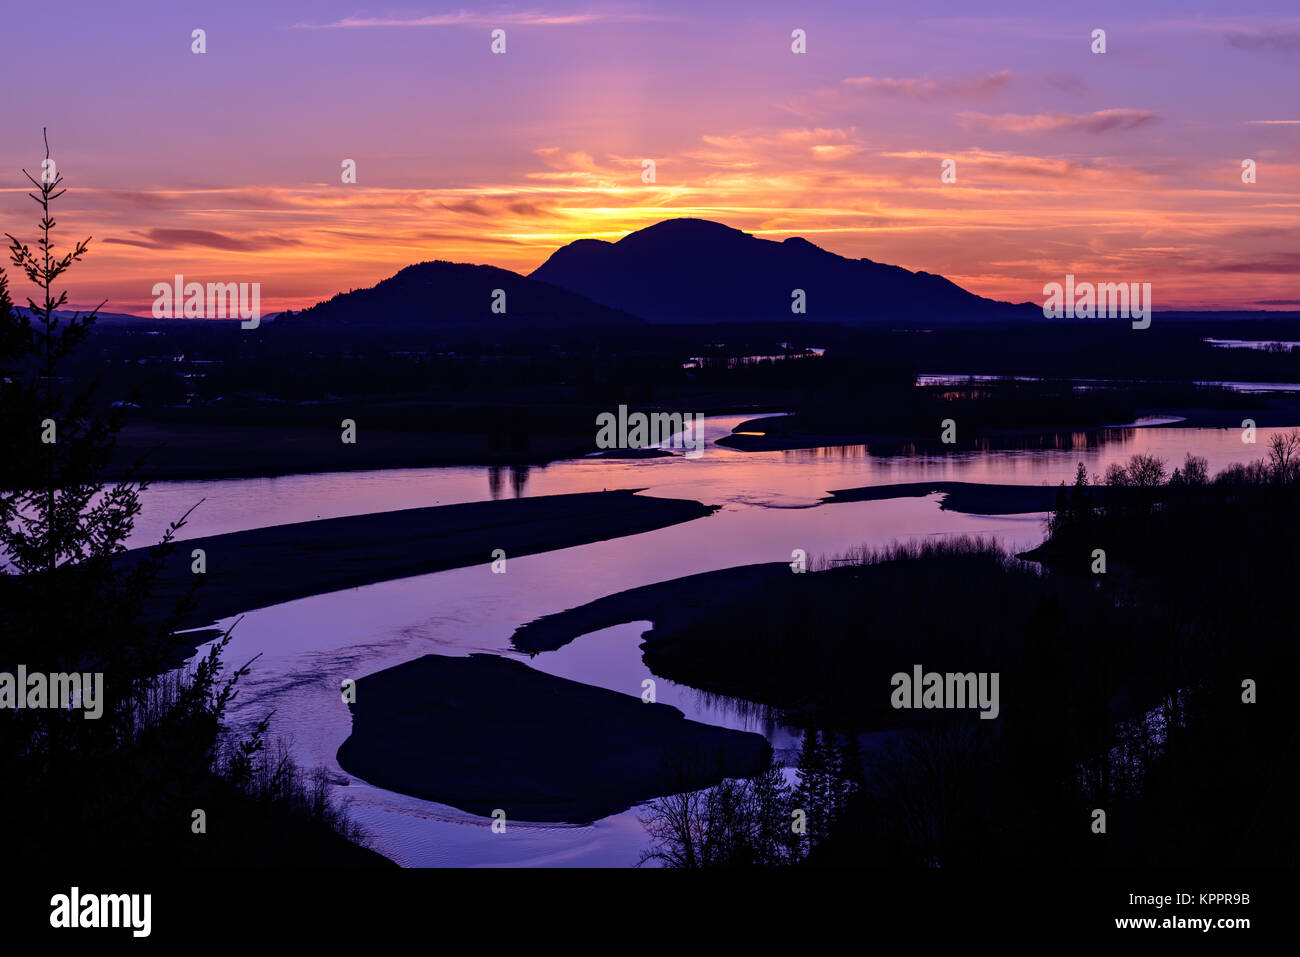 Bird's eye view photo of Fraser Valley at sunset, British Columbia, Canada Stock Photo